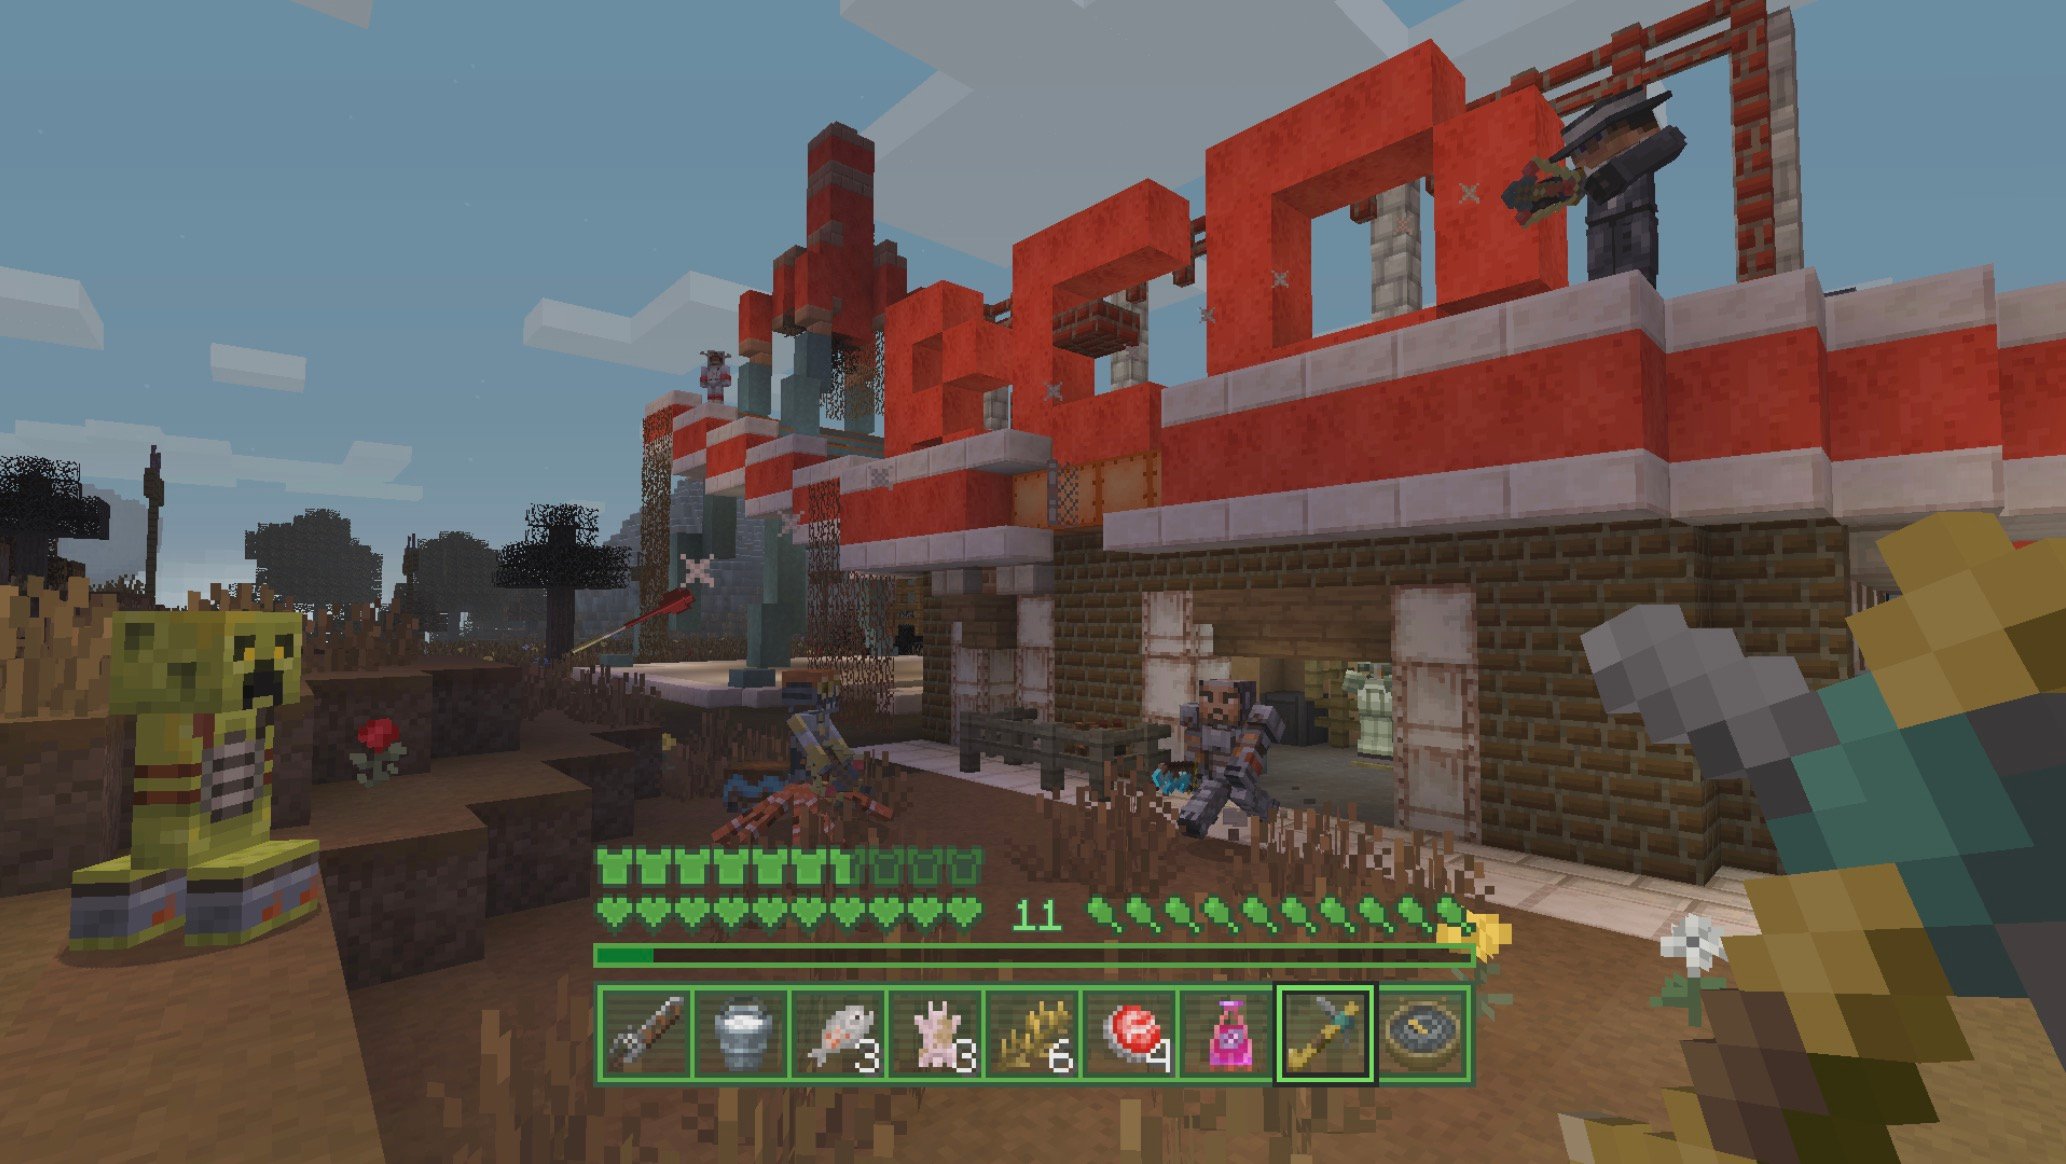 The Fallout Minecraft mash up delivers a new experience to Minecraft, including a Pip Boy UI.